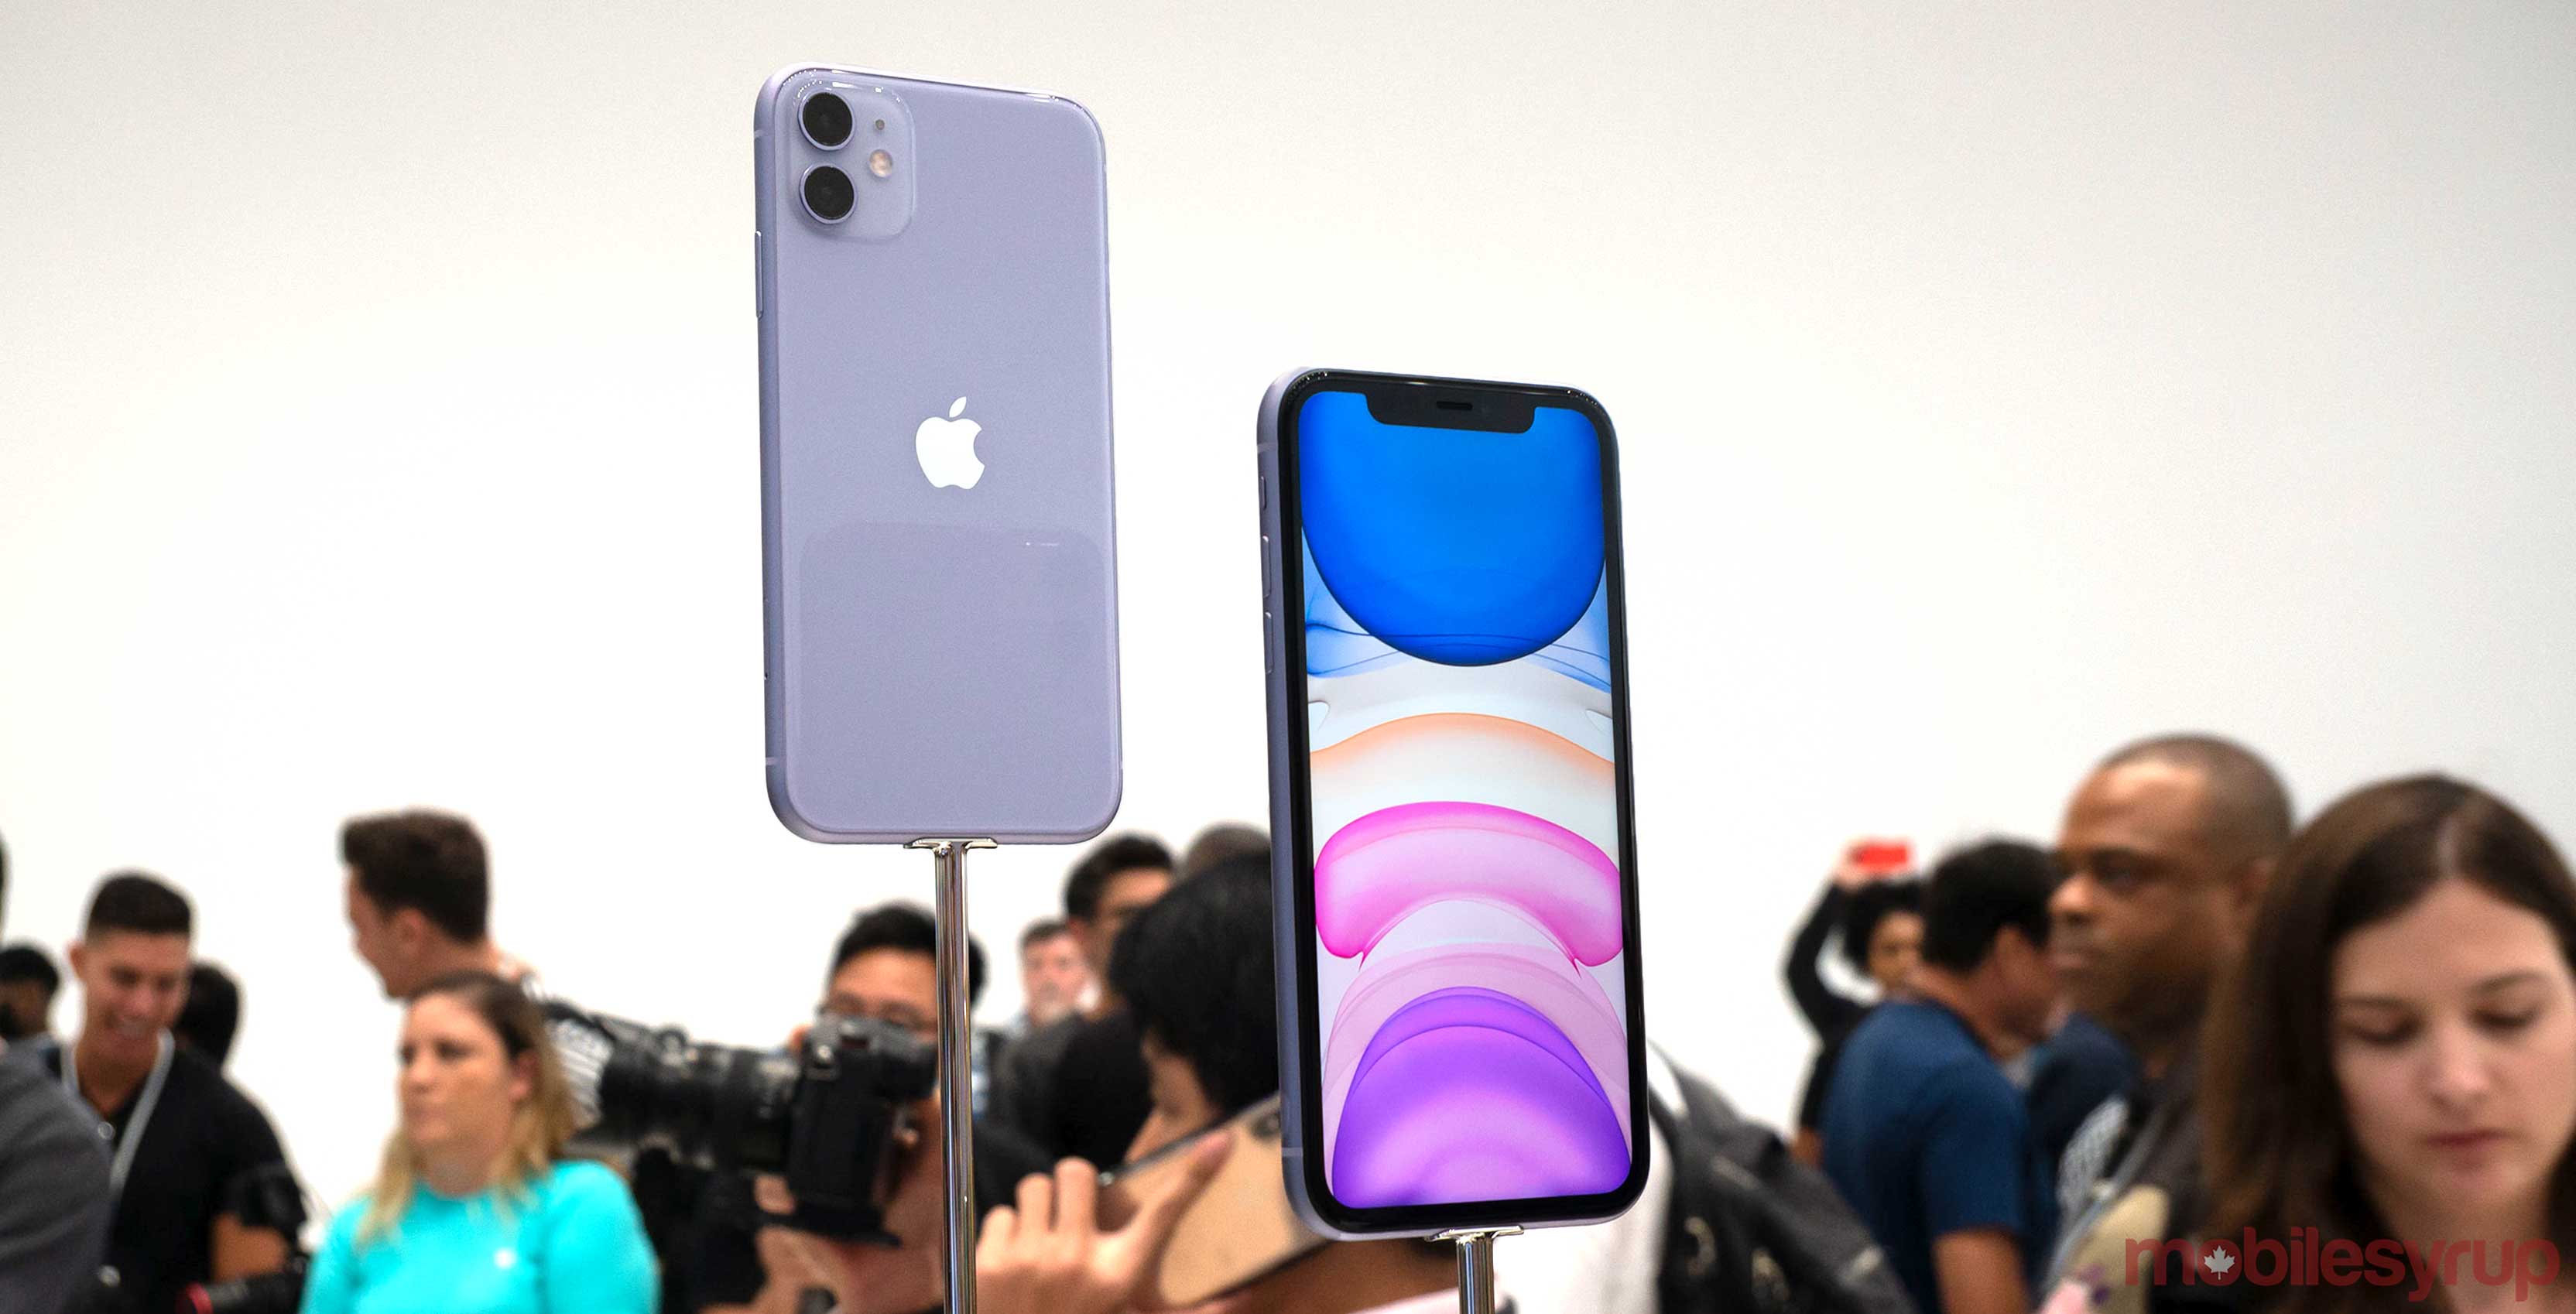 Iphone 11 11 Pro And 11 Pro Max Are Now Available In Canada